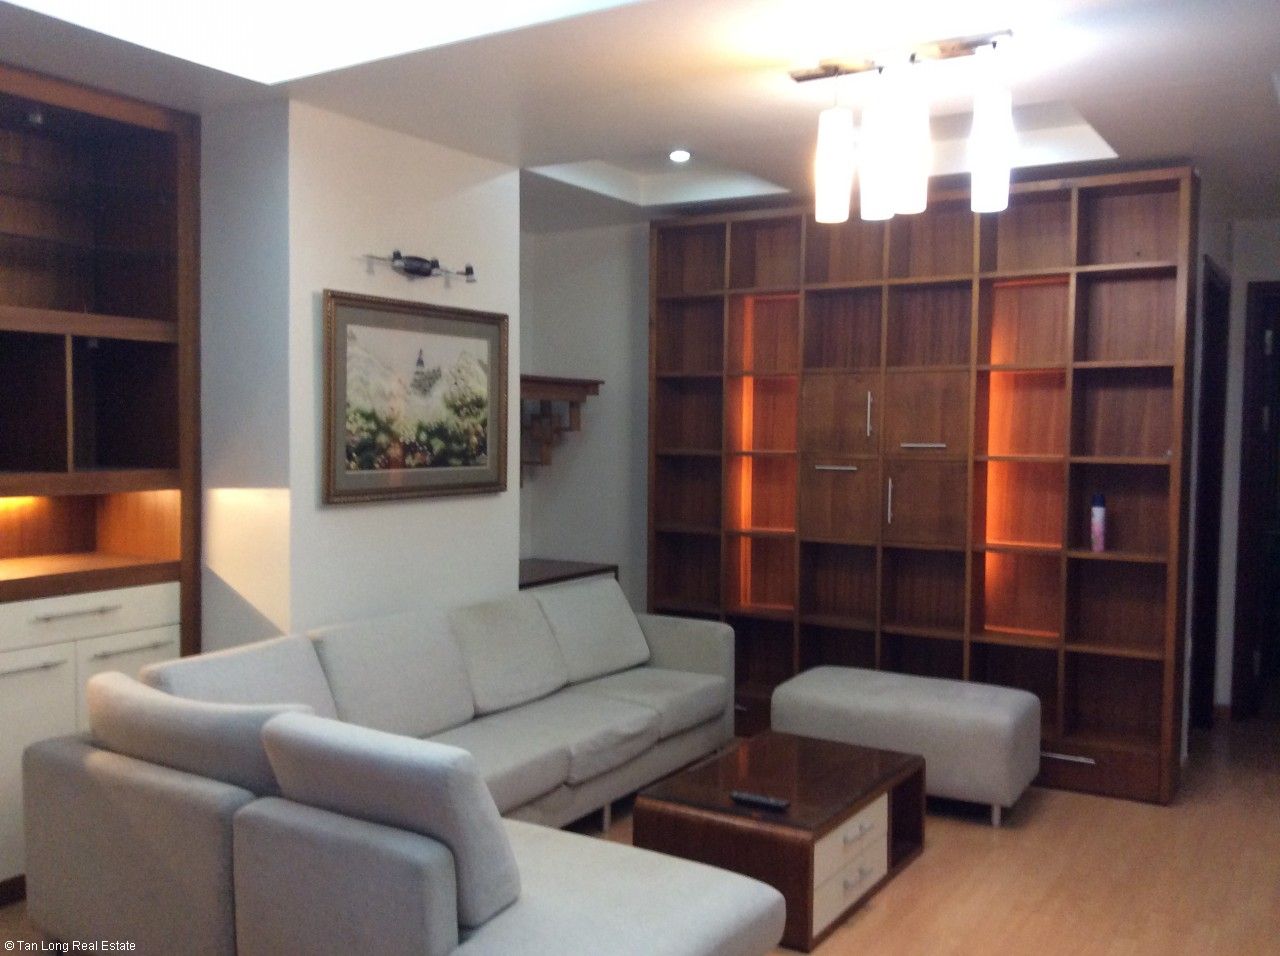 Fully equipped 3 bedroom apartment for rent in Kinh Do Building, Hai Ba Trung dist, Hanoi 5